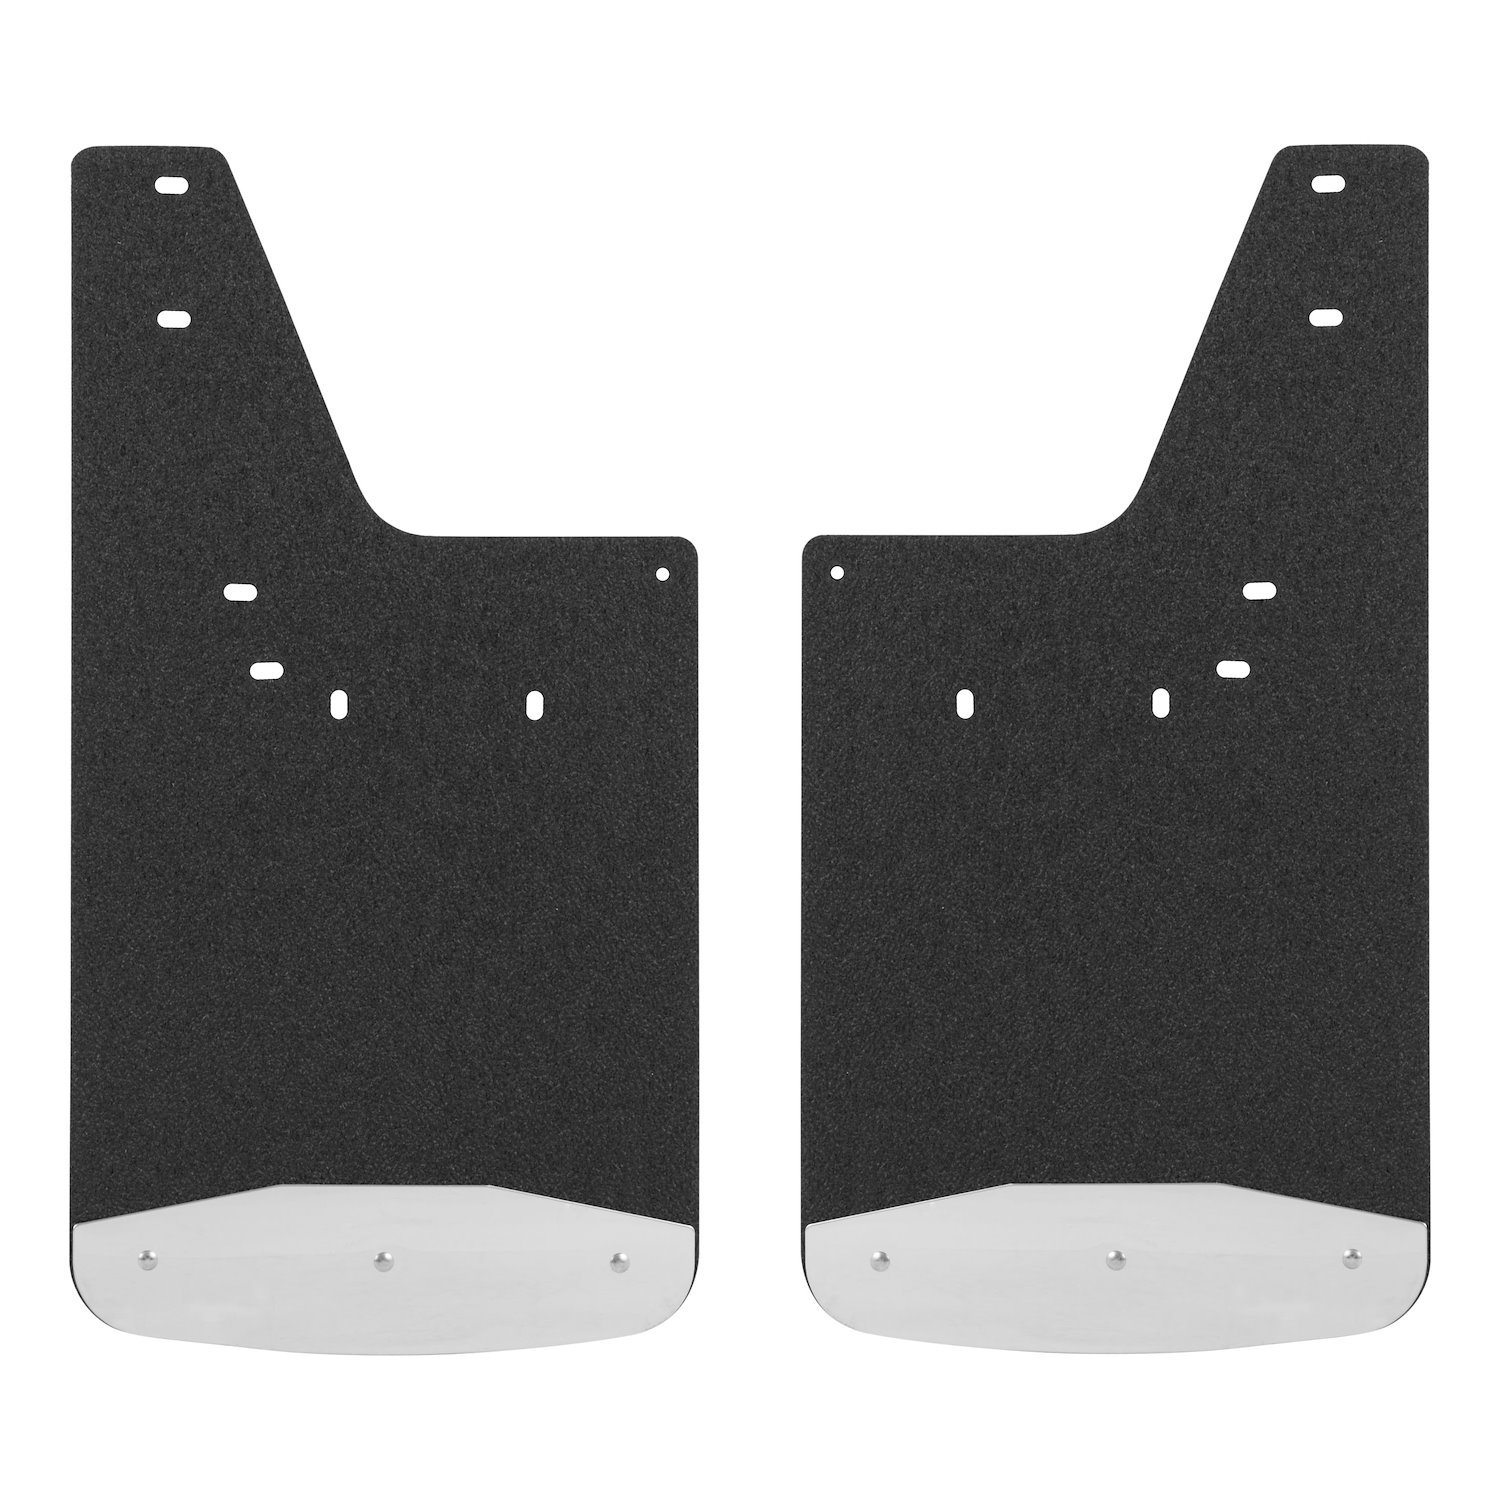 250933 Rear 12 in. x 23 in. Rubber Mud Guards Fits Select Dodge, Ram 1500, 2500, 3500